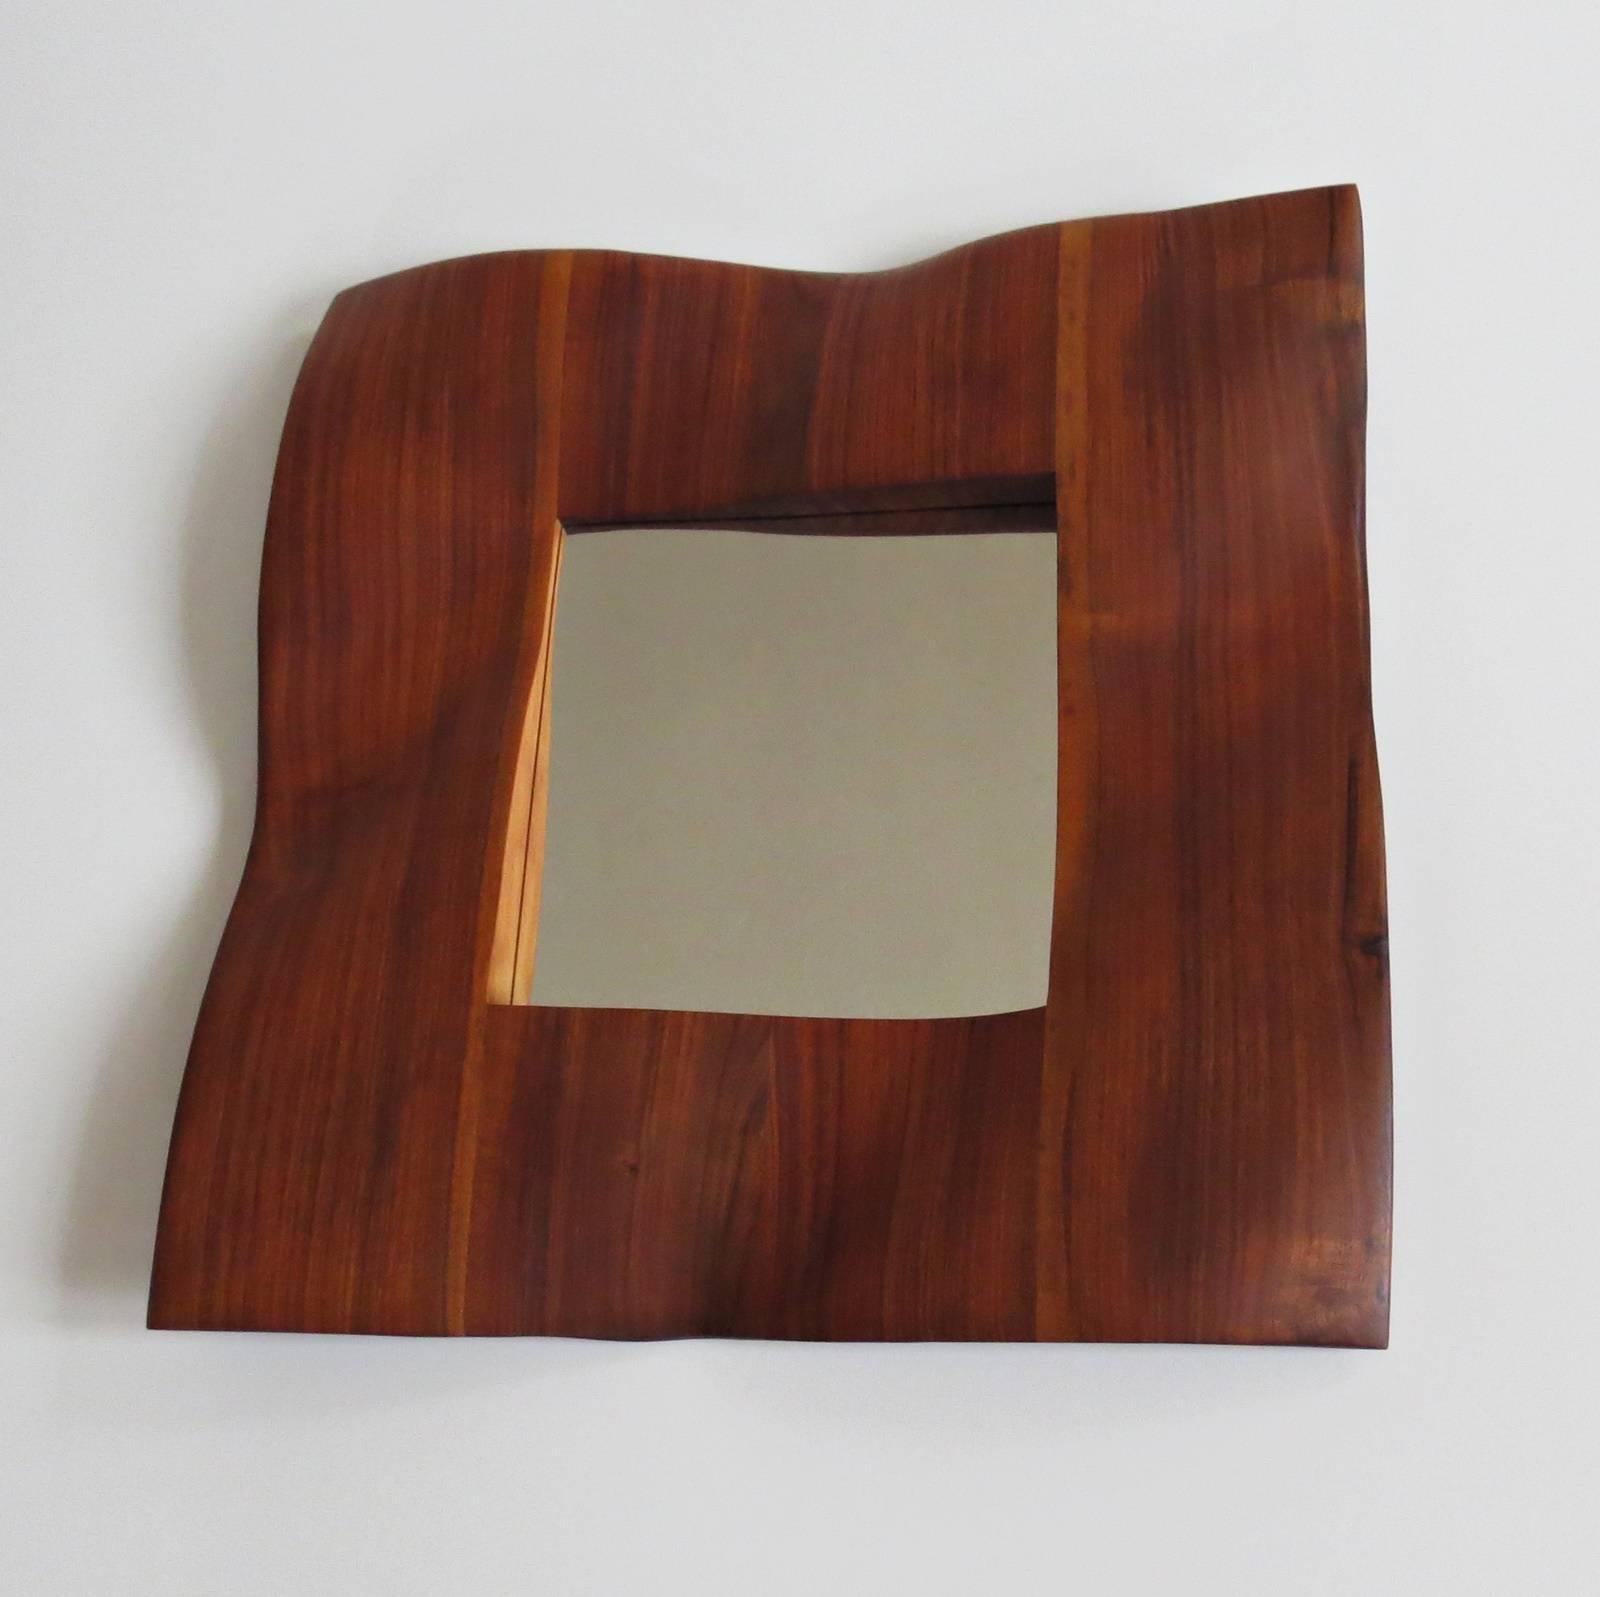 Solid wood mirror by German designer and sculptor Eckehard Weimann.
The frame is organically worked out like a wave.
He hangs on the wall like a sculpture and casts beautiful shadows.
Frame size is about 55 x 55 cm, mirror itself is about 25 x